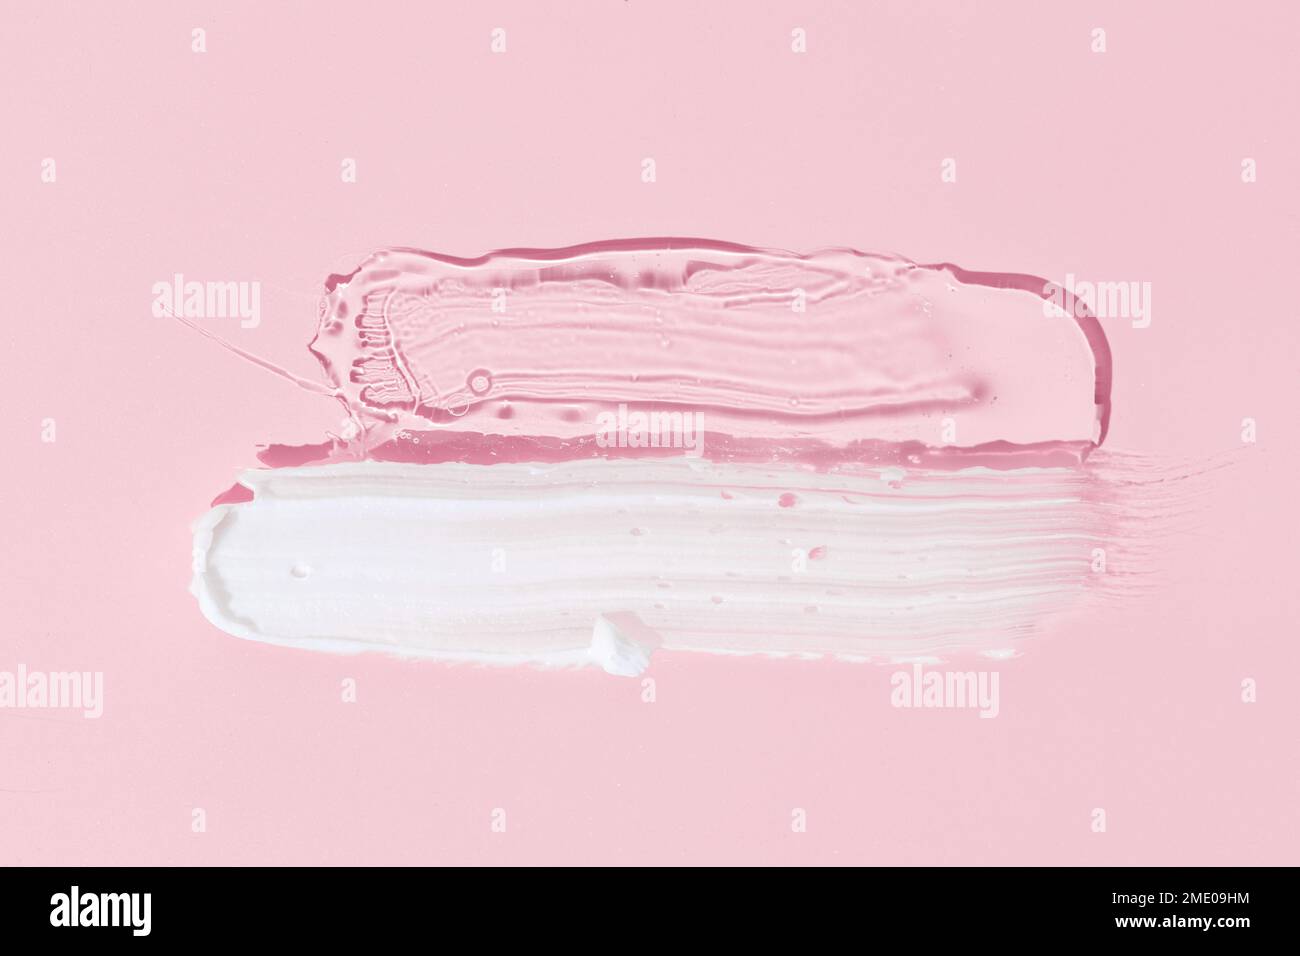 White cream and clear gel cosmetic smudge drops texture isolated on pink background. Cosmetic smears Stock Photo